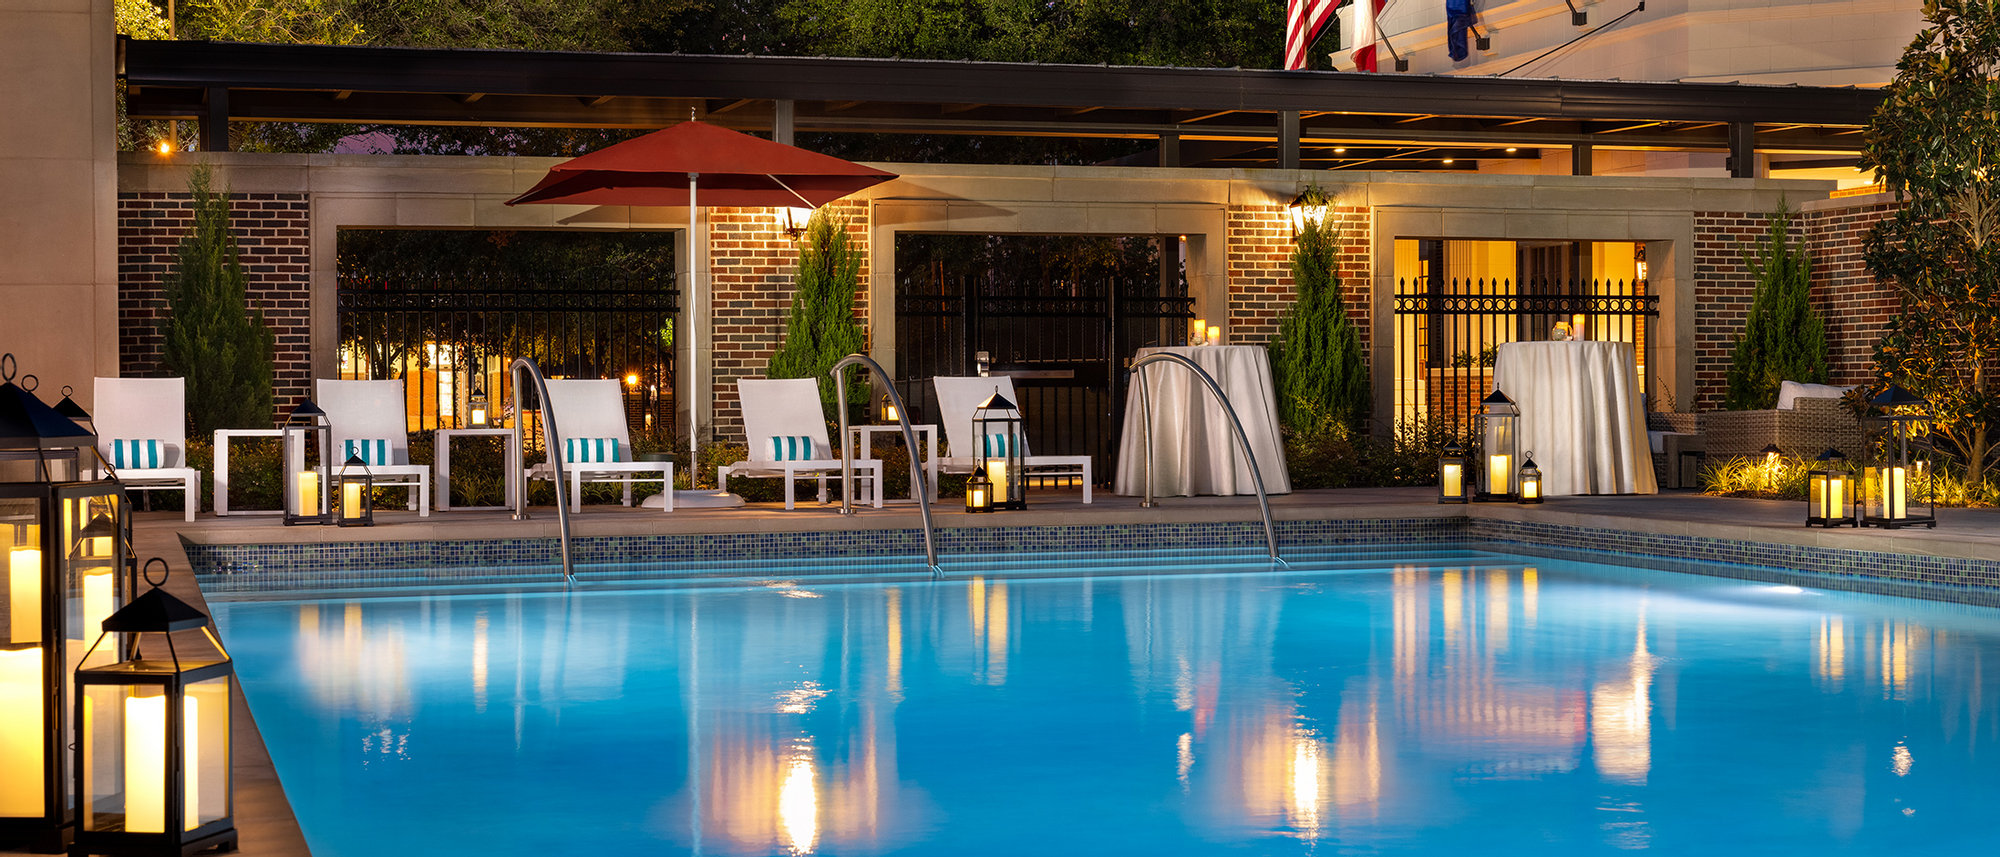 Close-up of the outdoor pool at Warwick Melrose Dallas 